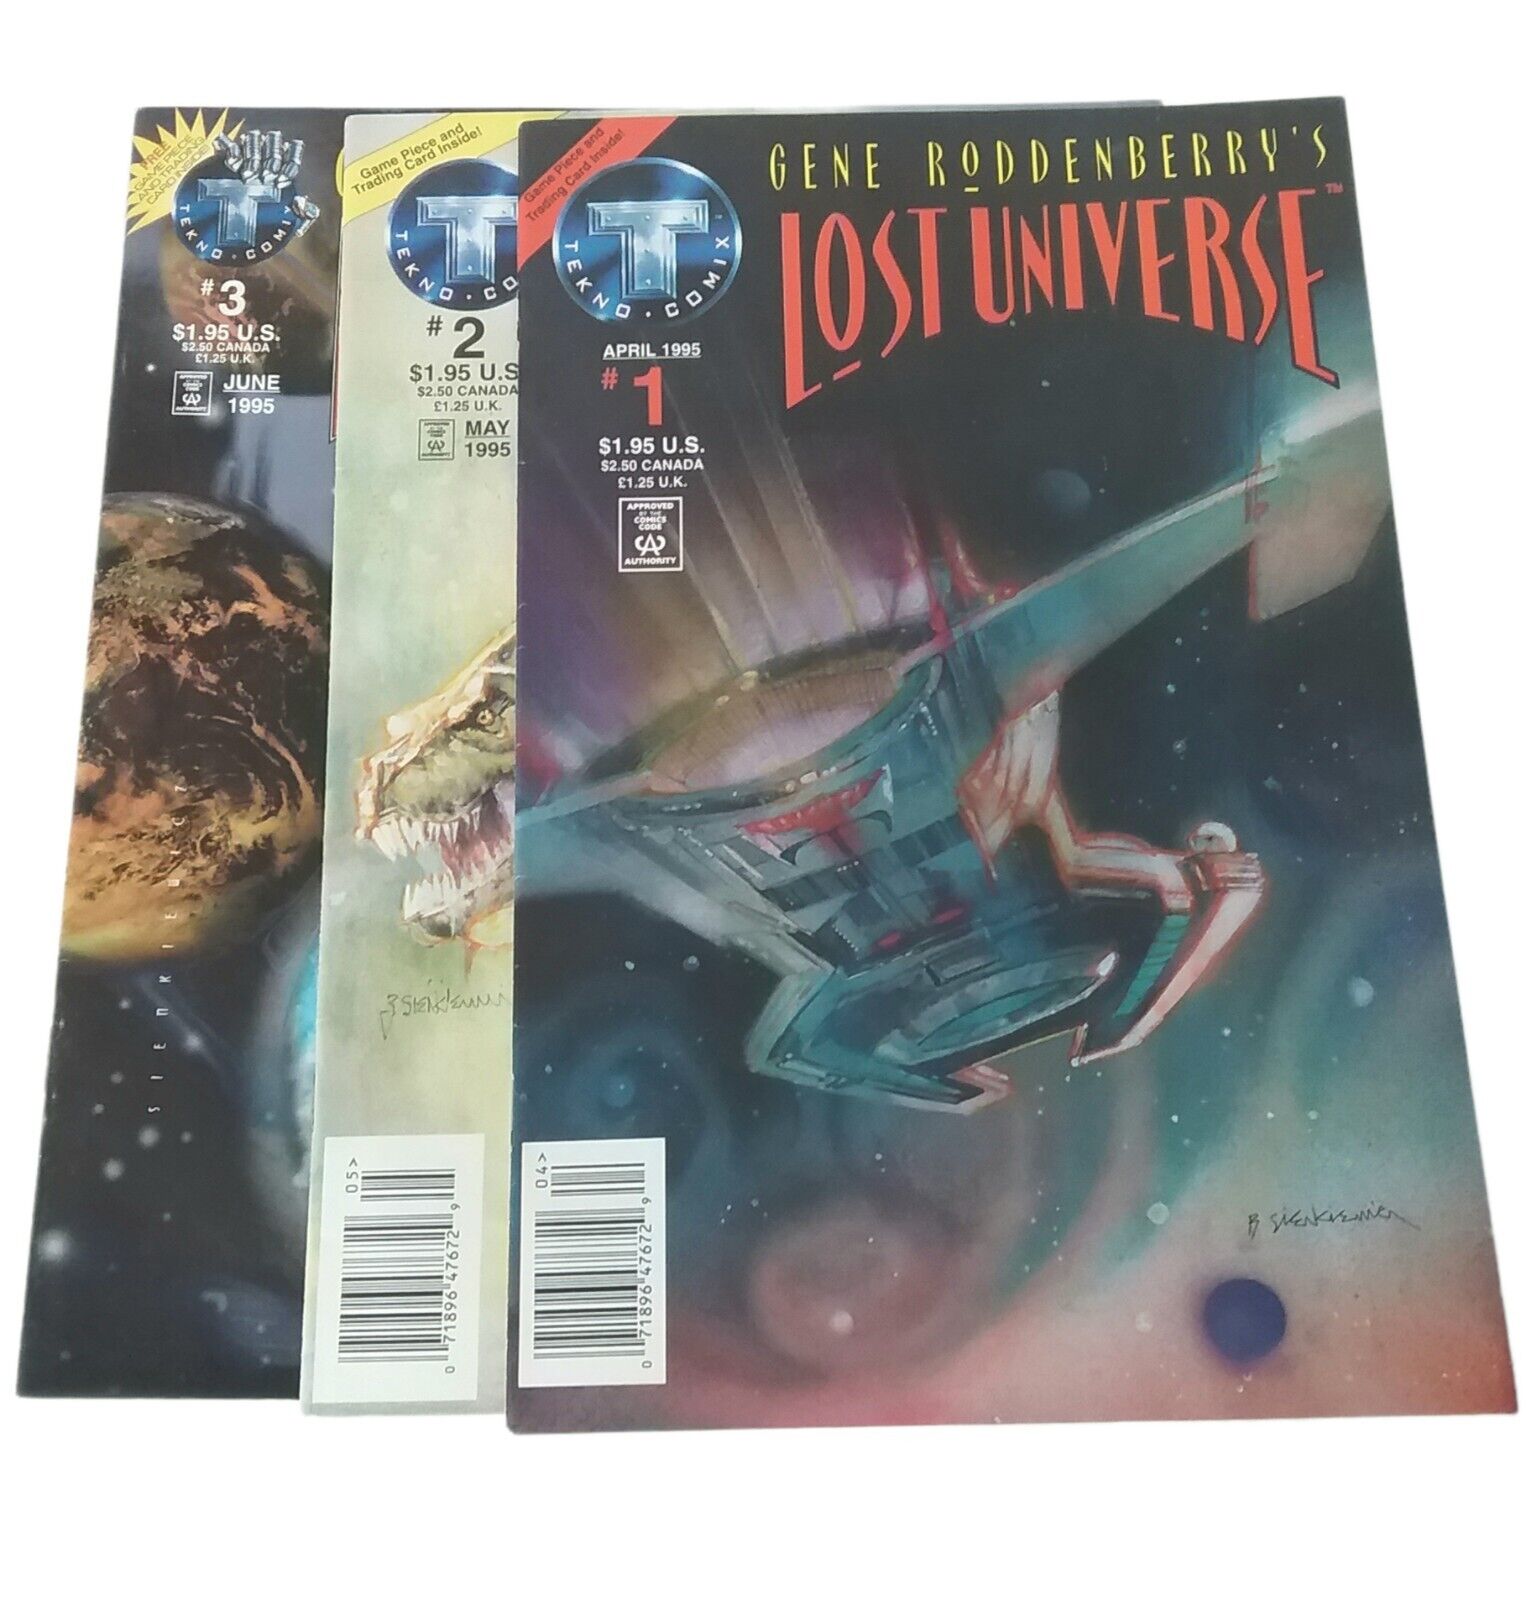 LOST UNIVERSE Issue #1, 2, 3 April May June 1995 Tekno Comix Gene Roddenberry's